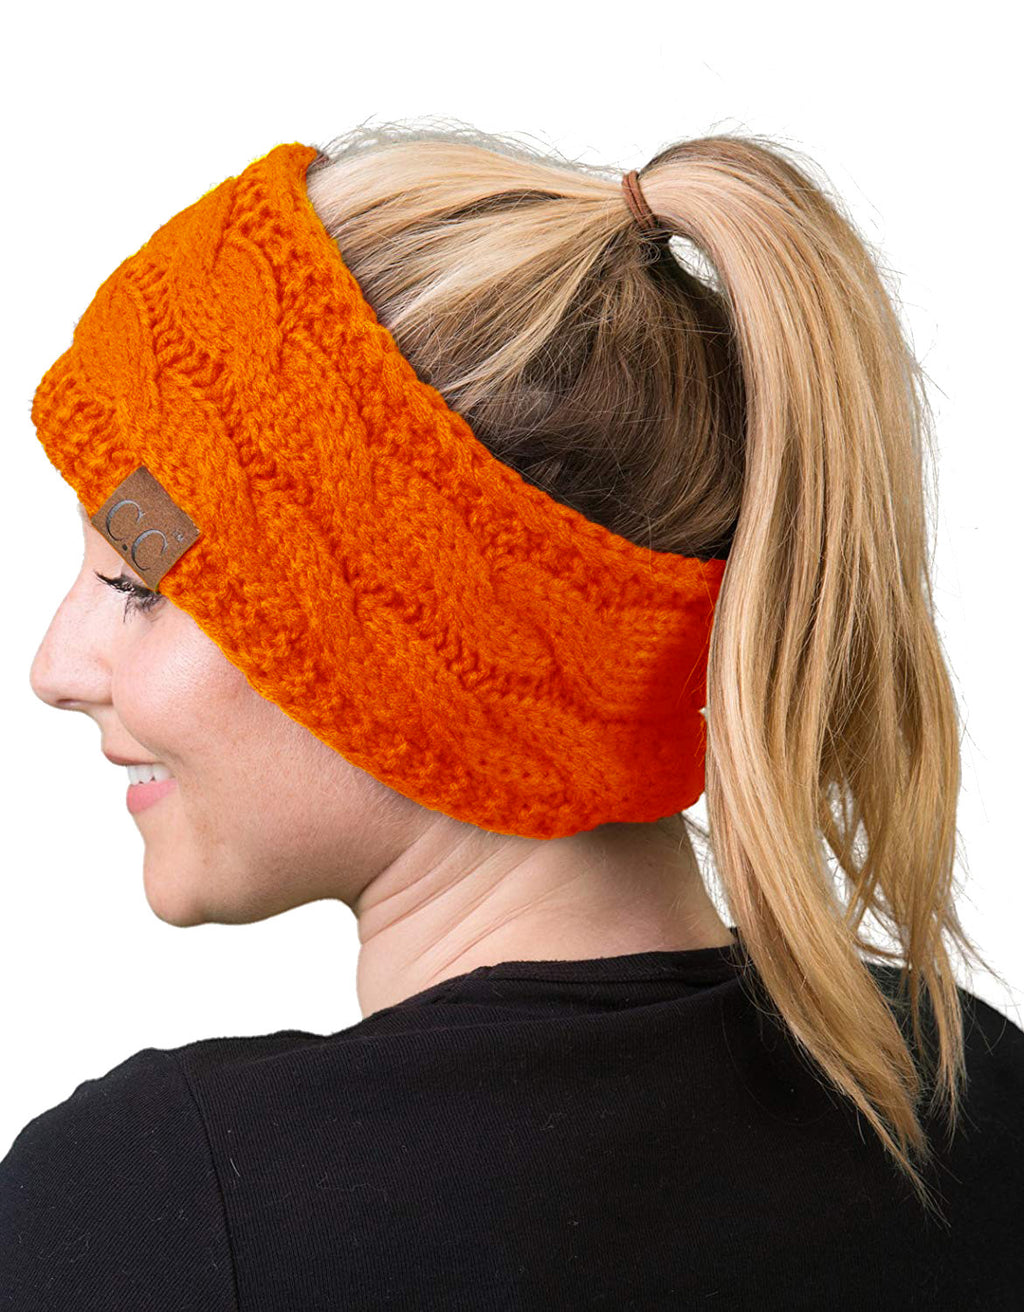 C.C. Cable Knit Lined Winter Headband - Neon